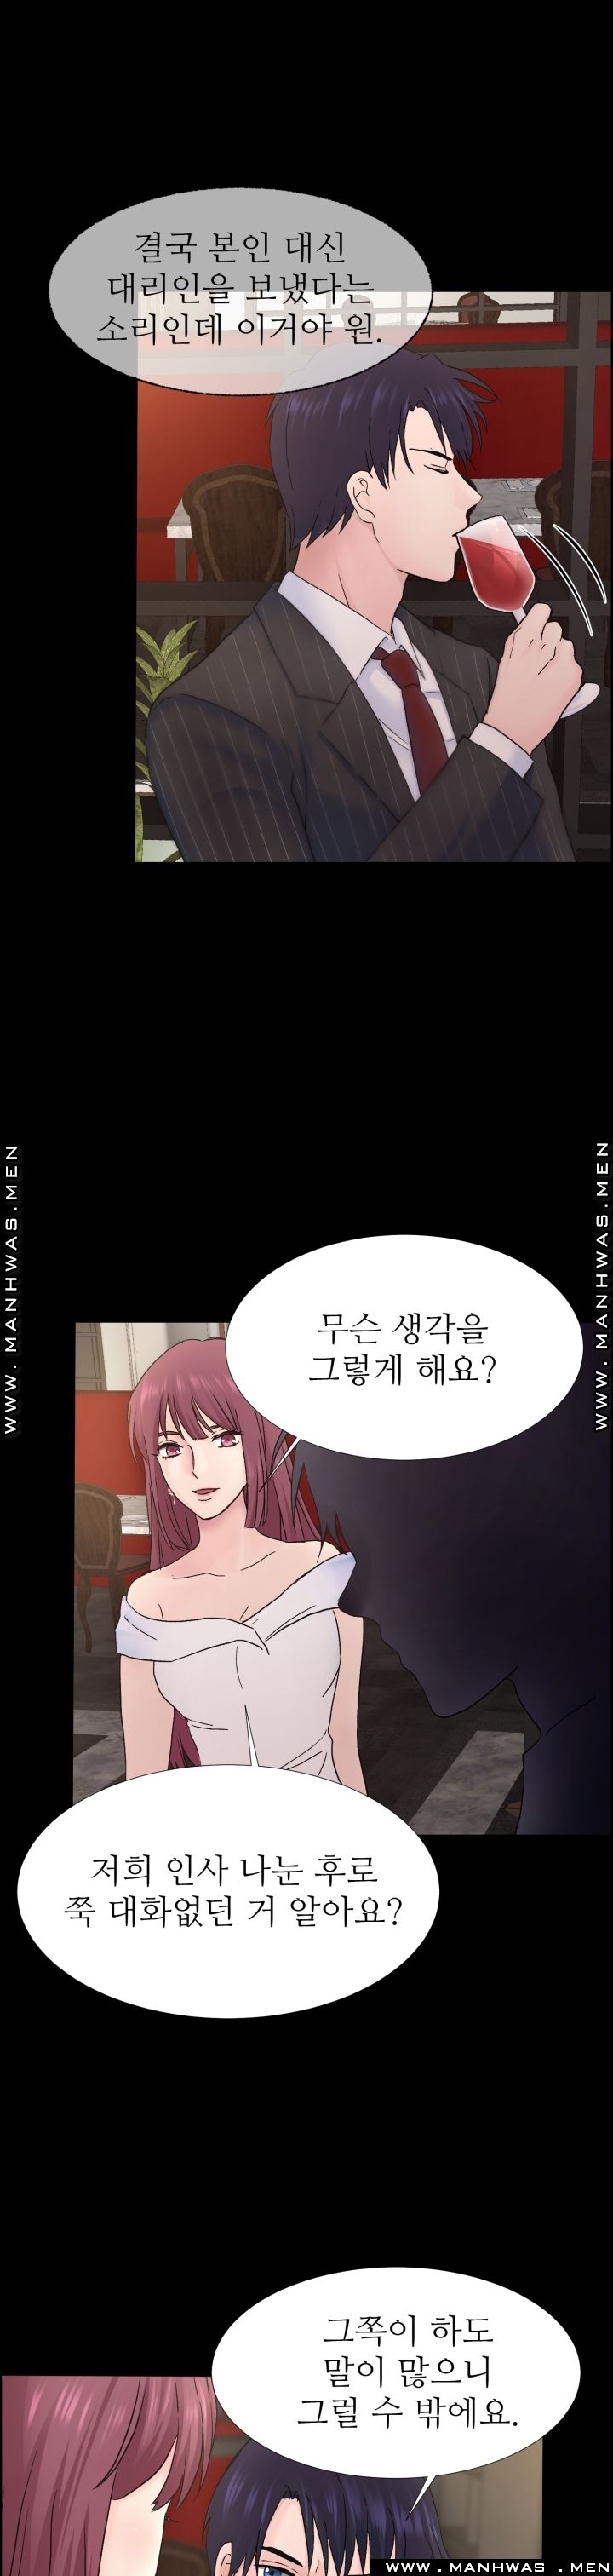 The Taste of Affair Raw - Chapter 2 Page 20